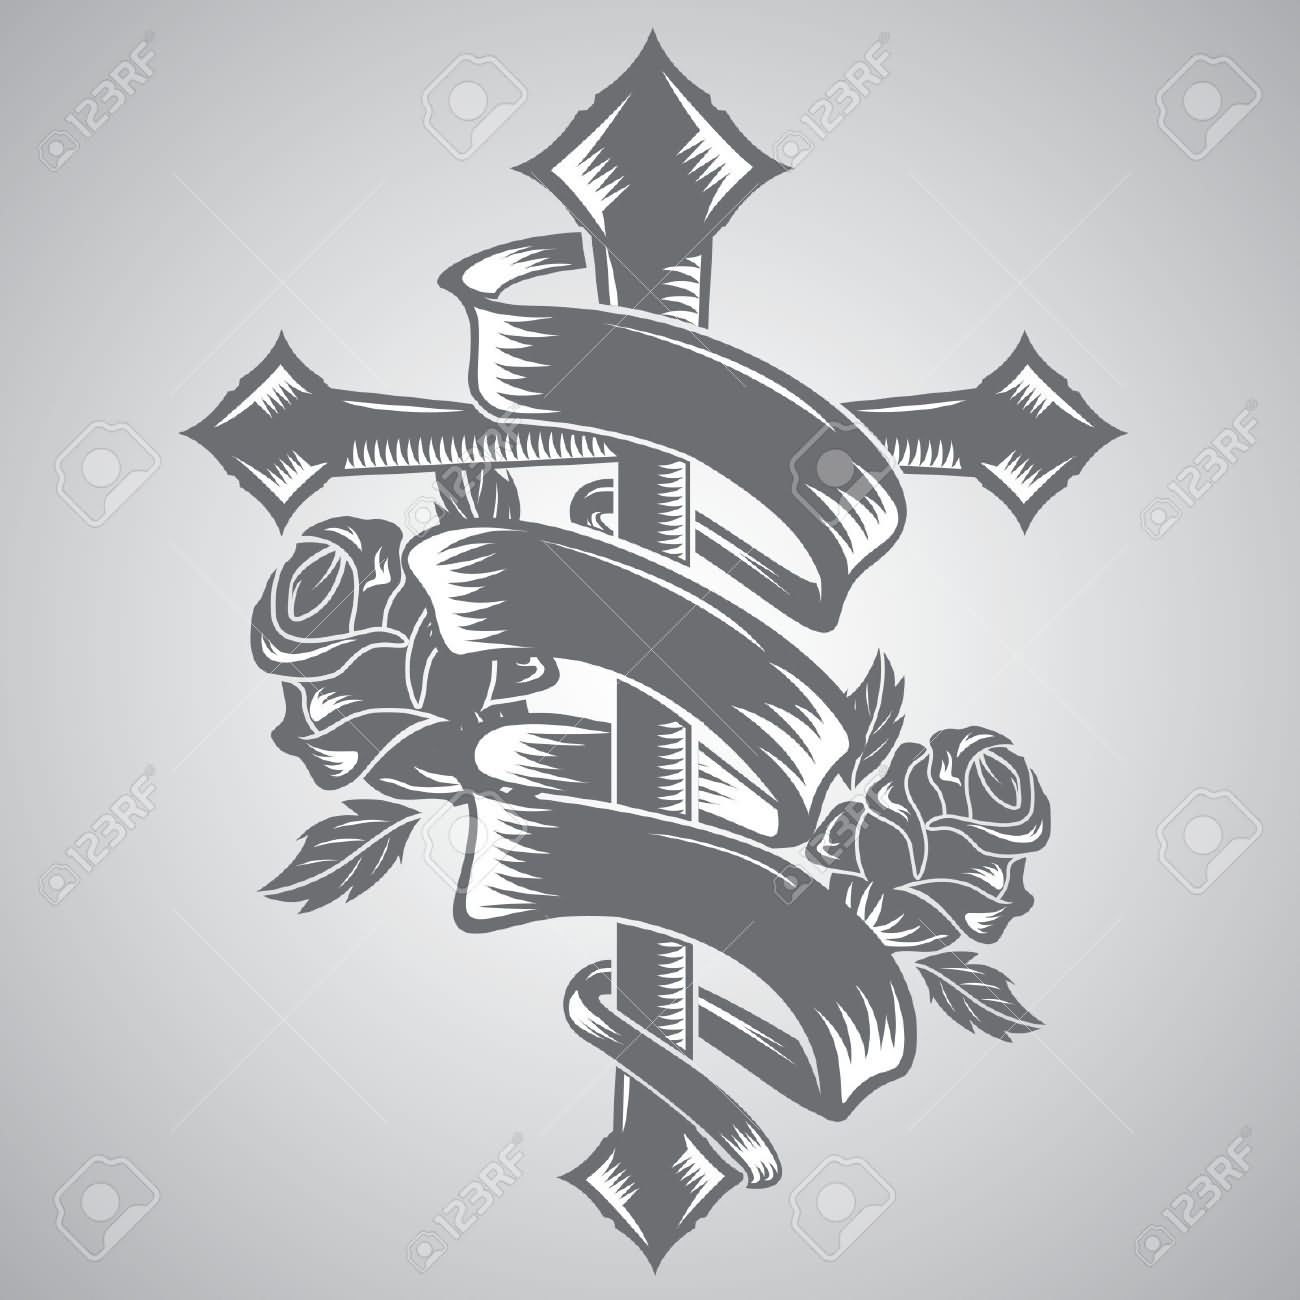 Cross With Roses And Ribbon Tattoo Design